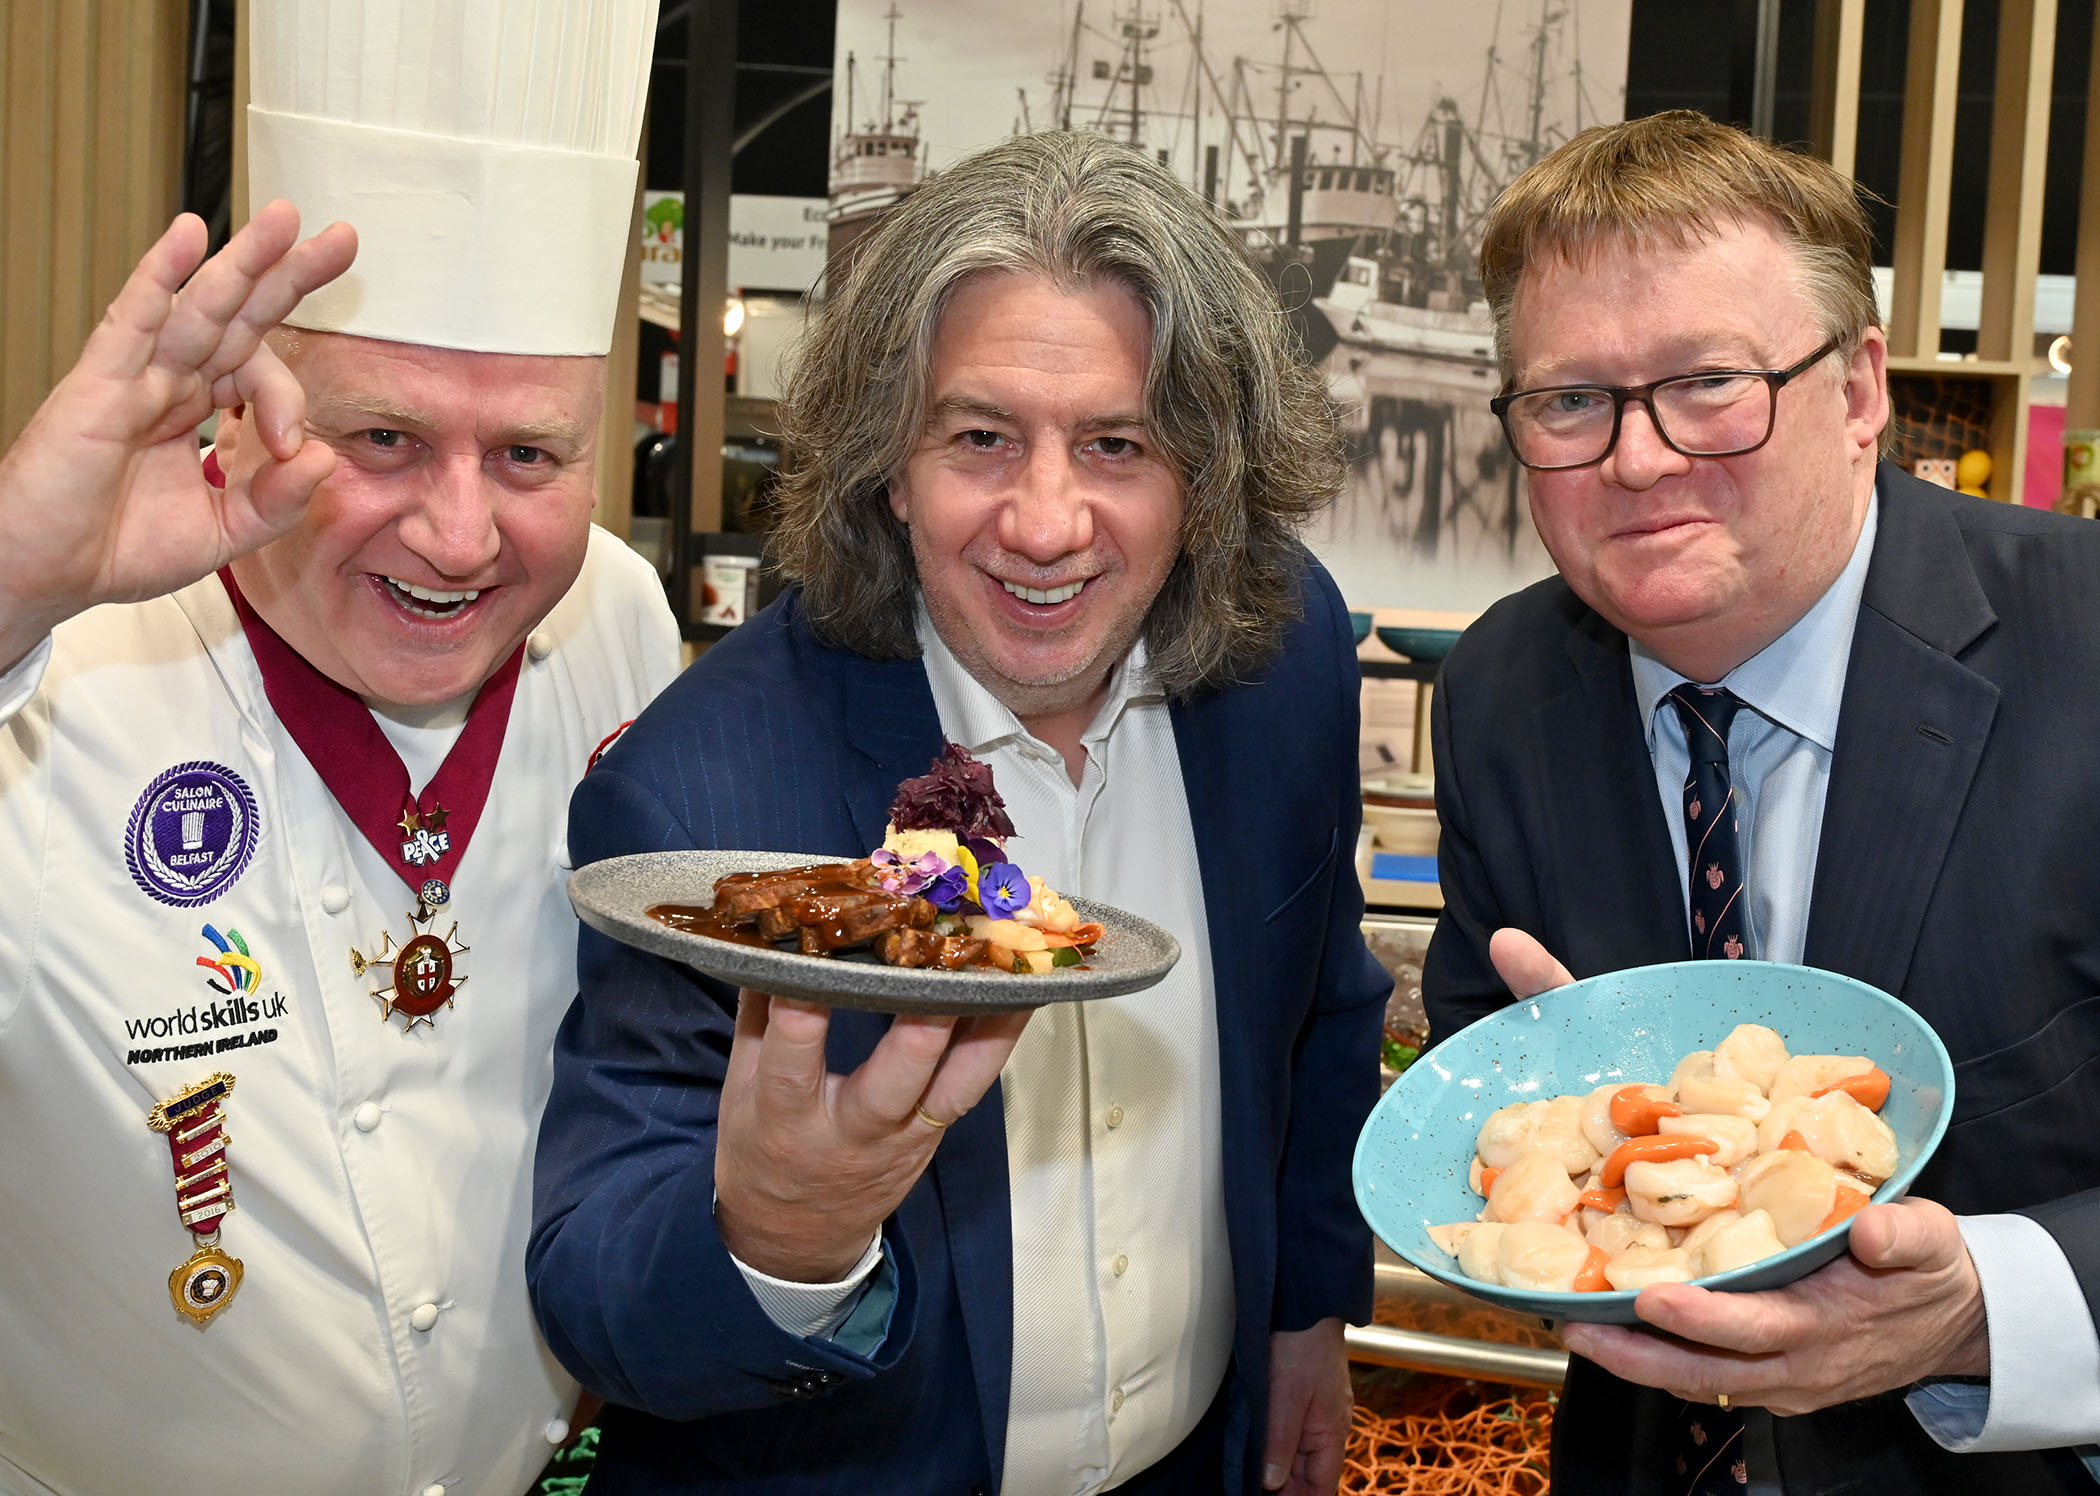 Salon Culinaire returns to IFEX with over 30 competitions